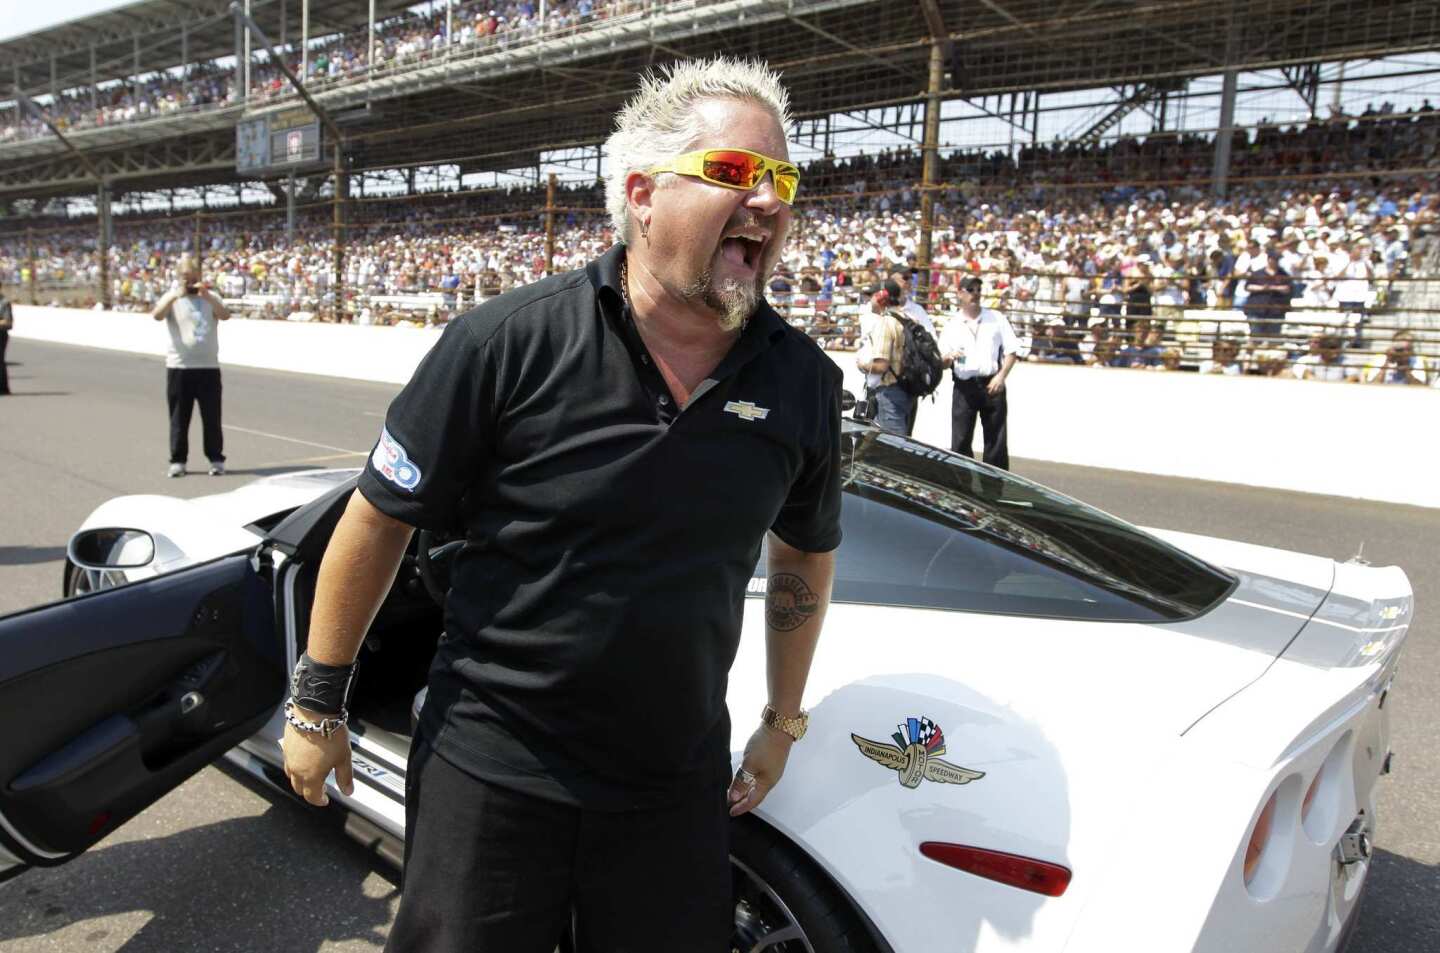 Celebrity chef and pace-car driver Guy Fieri prepares for the start of the Indy 500 on Sunday.